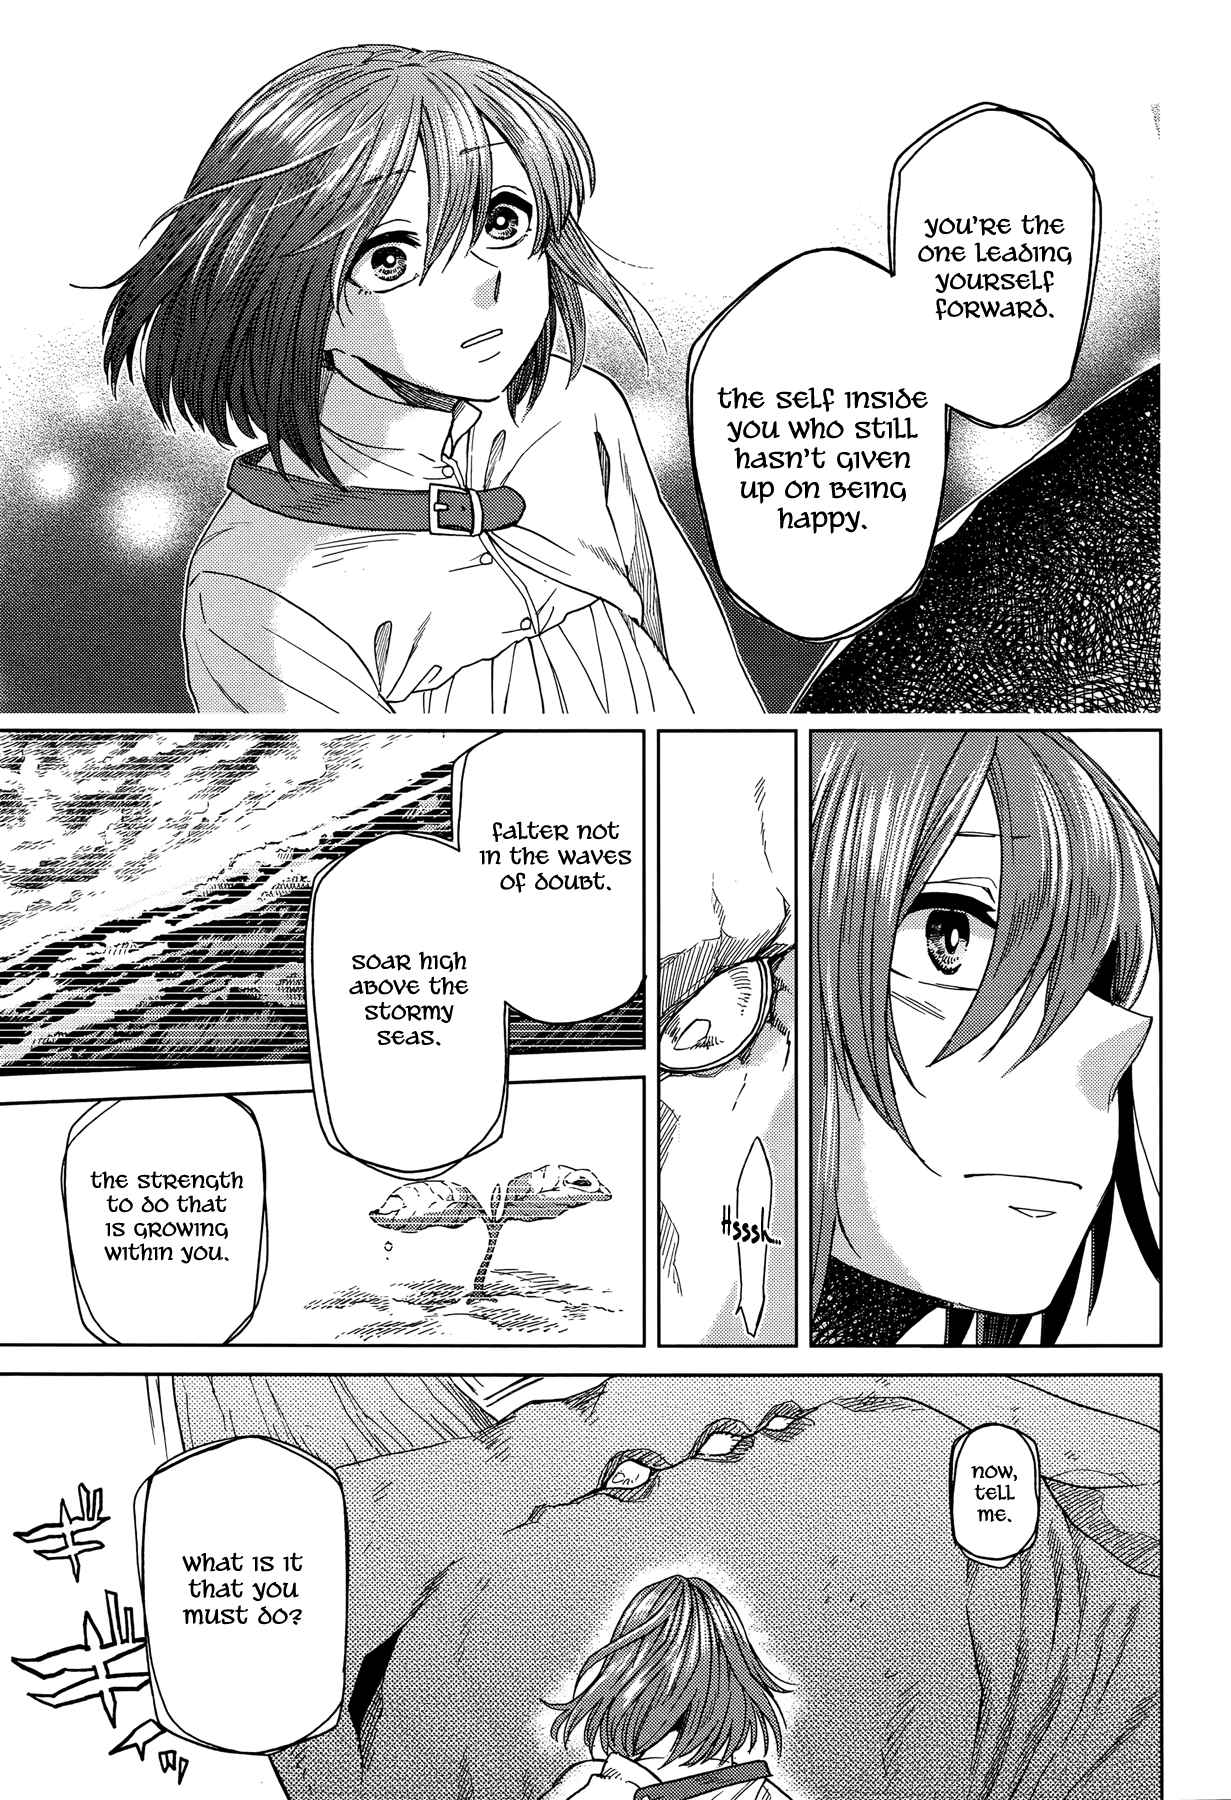 The Ancient Magus' Bride Vol. 8 Ch. 40 What is bred in the bone will not out of the flesh